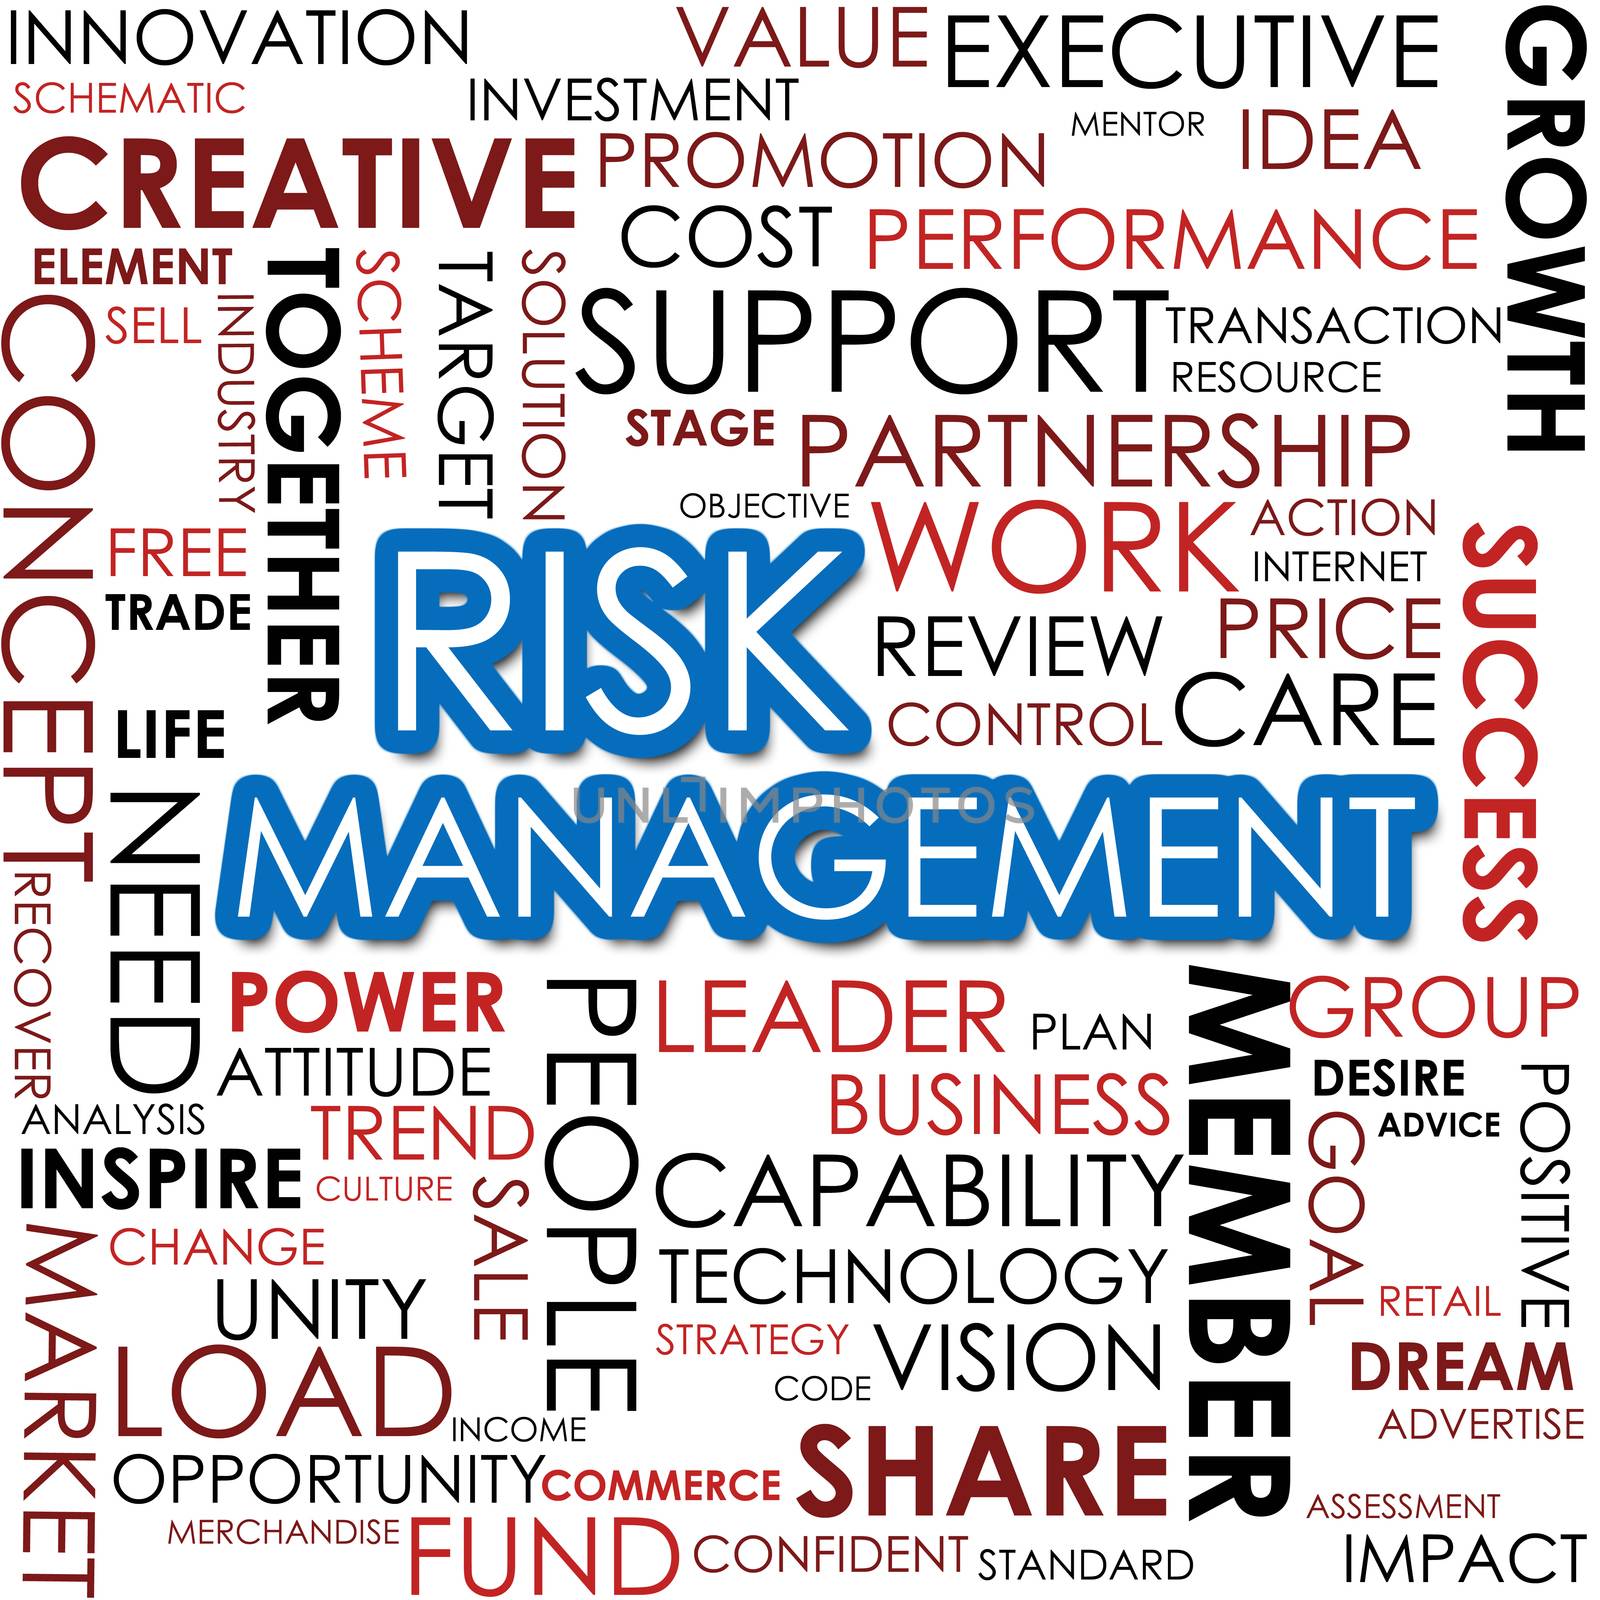 Risk management word cloud image with hi-res rendered artwork that could be used for any graphic design.